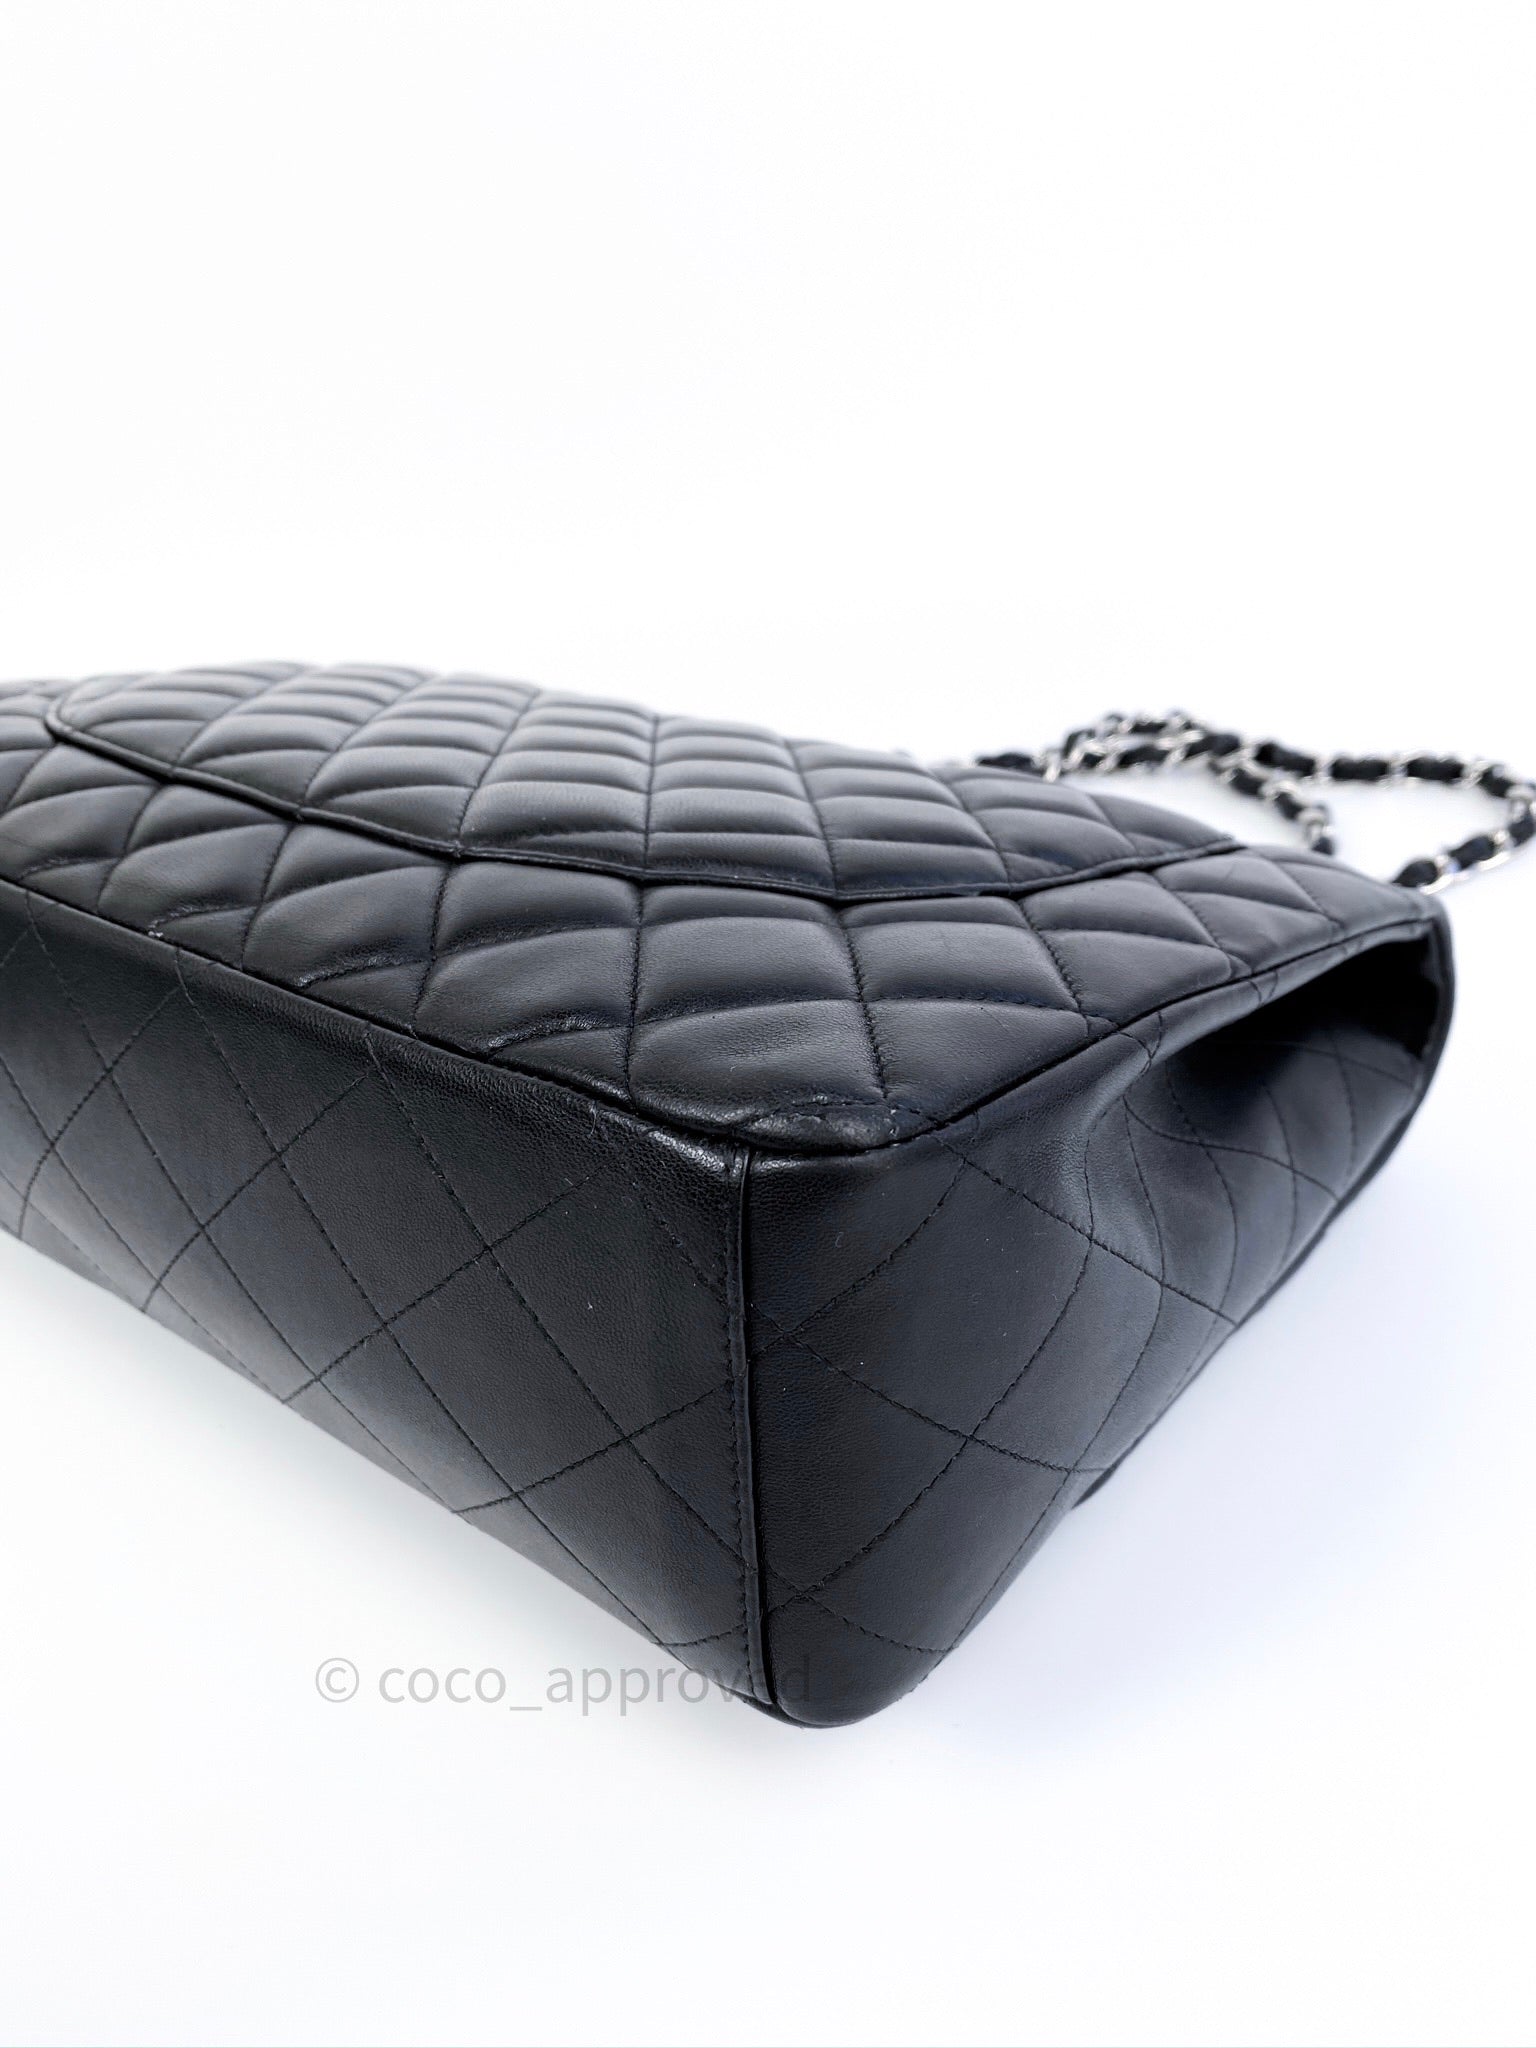 Chanel Black Lambskin Push Lock Full Flap Quilted Chain Shoulder Bag  Available For Immediate Sale At Sotheby's